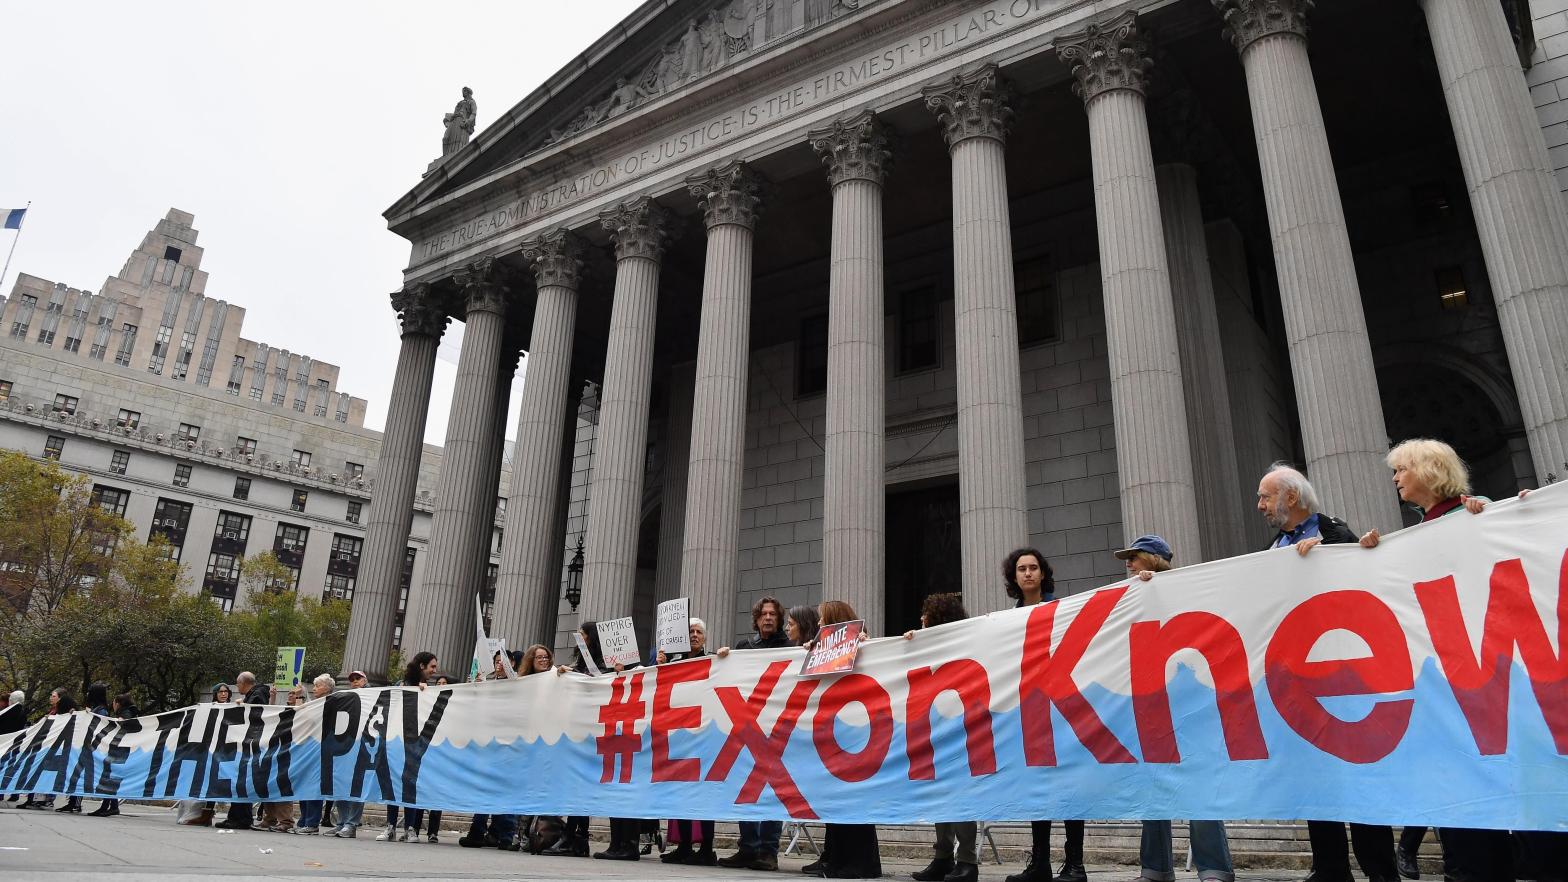 Climate activists protest on the fist day of the ExxonMobil trial outside the New York State Supreme Court building on October 22, 2019 in New York City. (Photo: ANGELA WEISS/AFP, Getty Images)